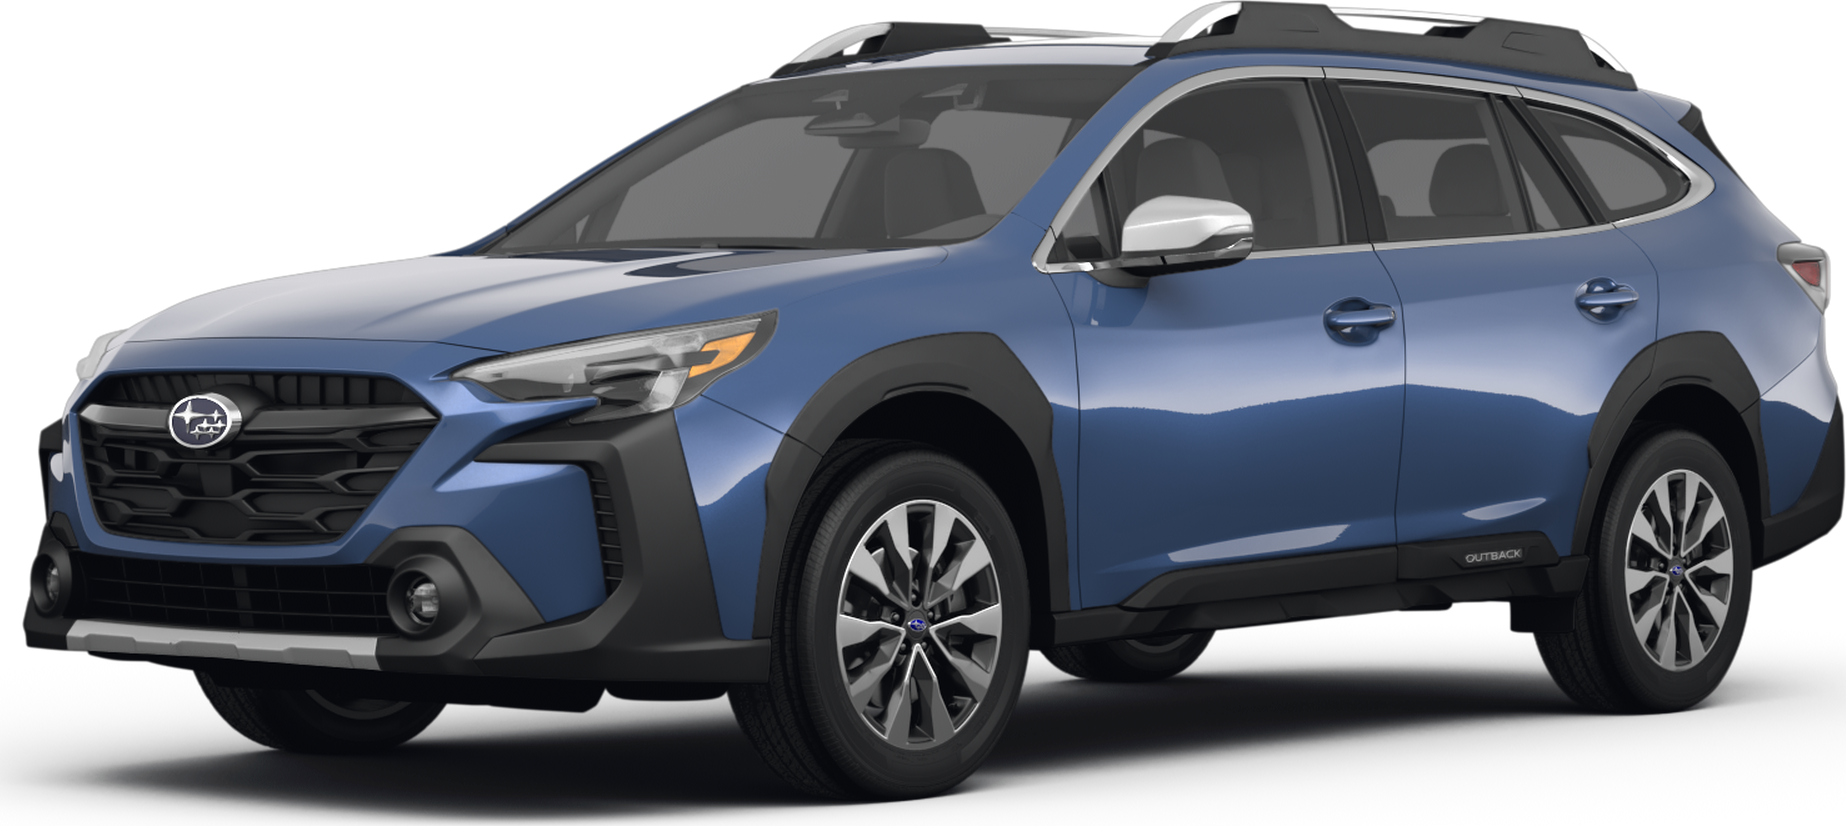 https://file.kelleybluebookimages.com/kbb/base/evox/CP/53121/2024-Subaru-Outback-front_53121_032_1846x826_XAS_cropped.png